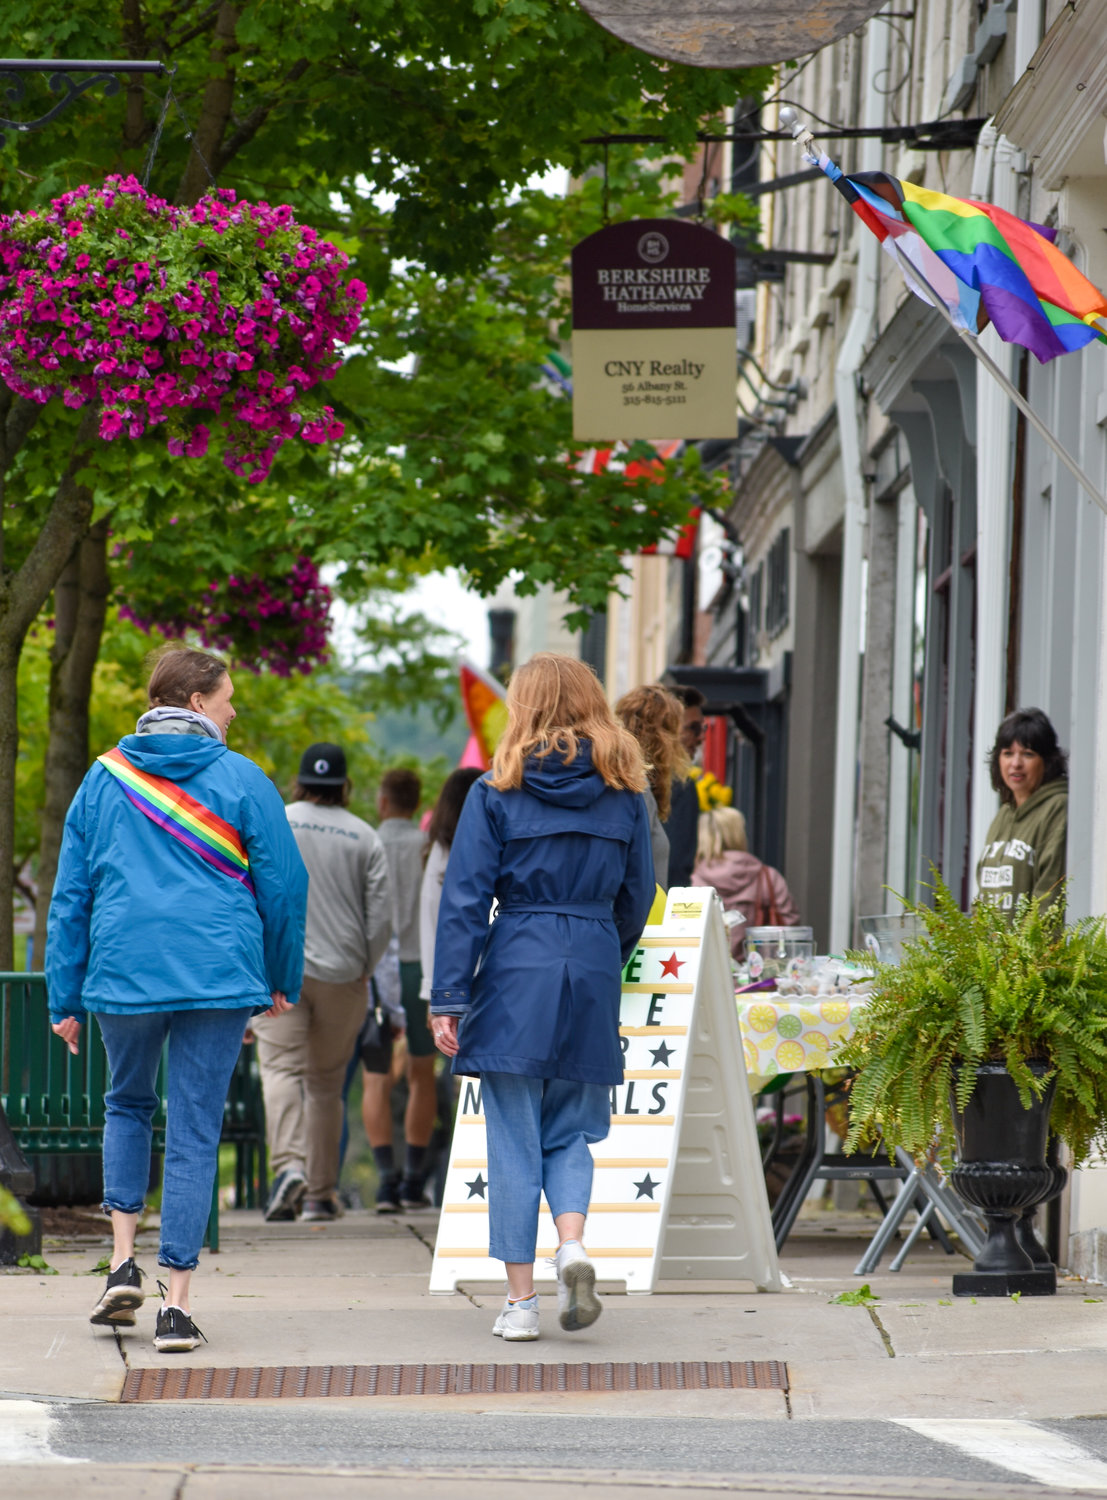 Cazenovia's main street was adorned with rainbows to show support for the LGBTQ community during Pride Month.